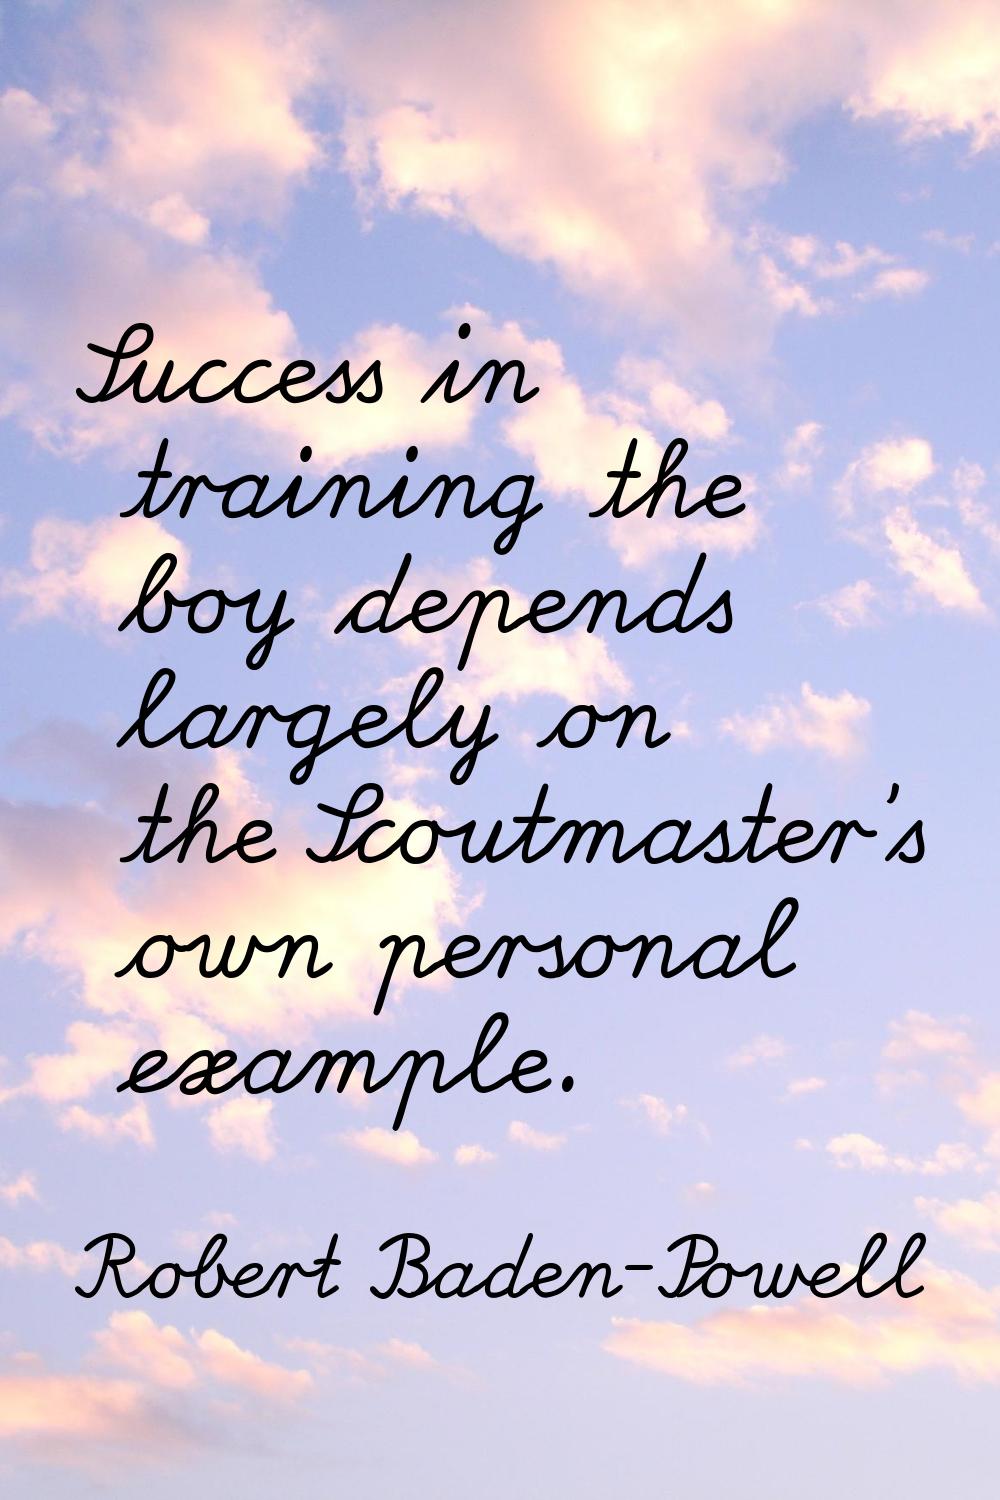 Success in training the boy depends largely on the Scoutmaster's own personal example.